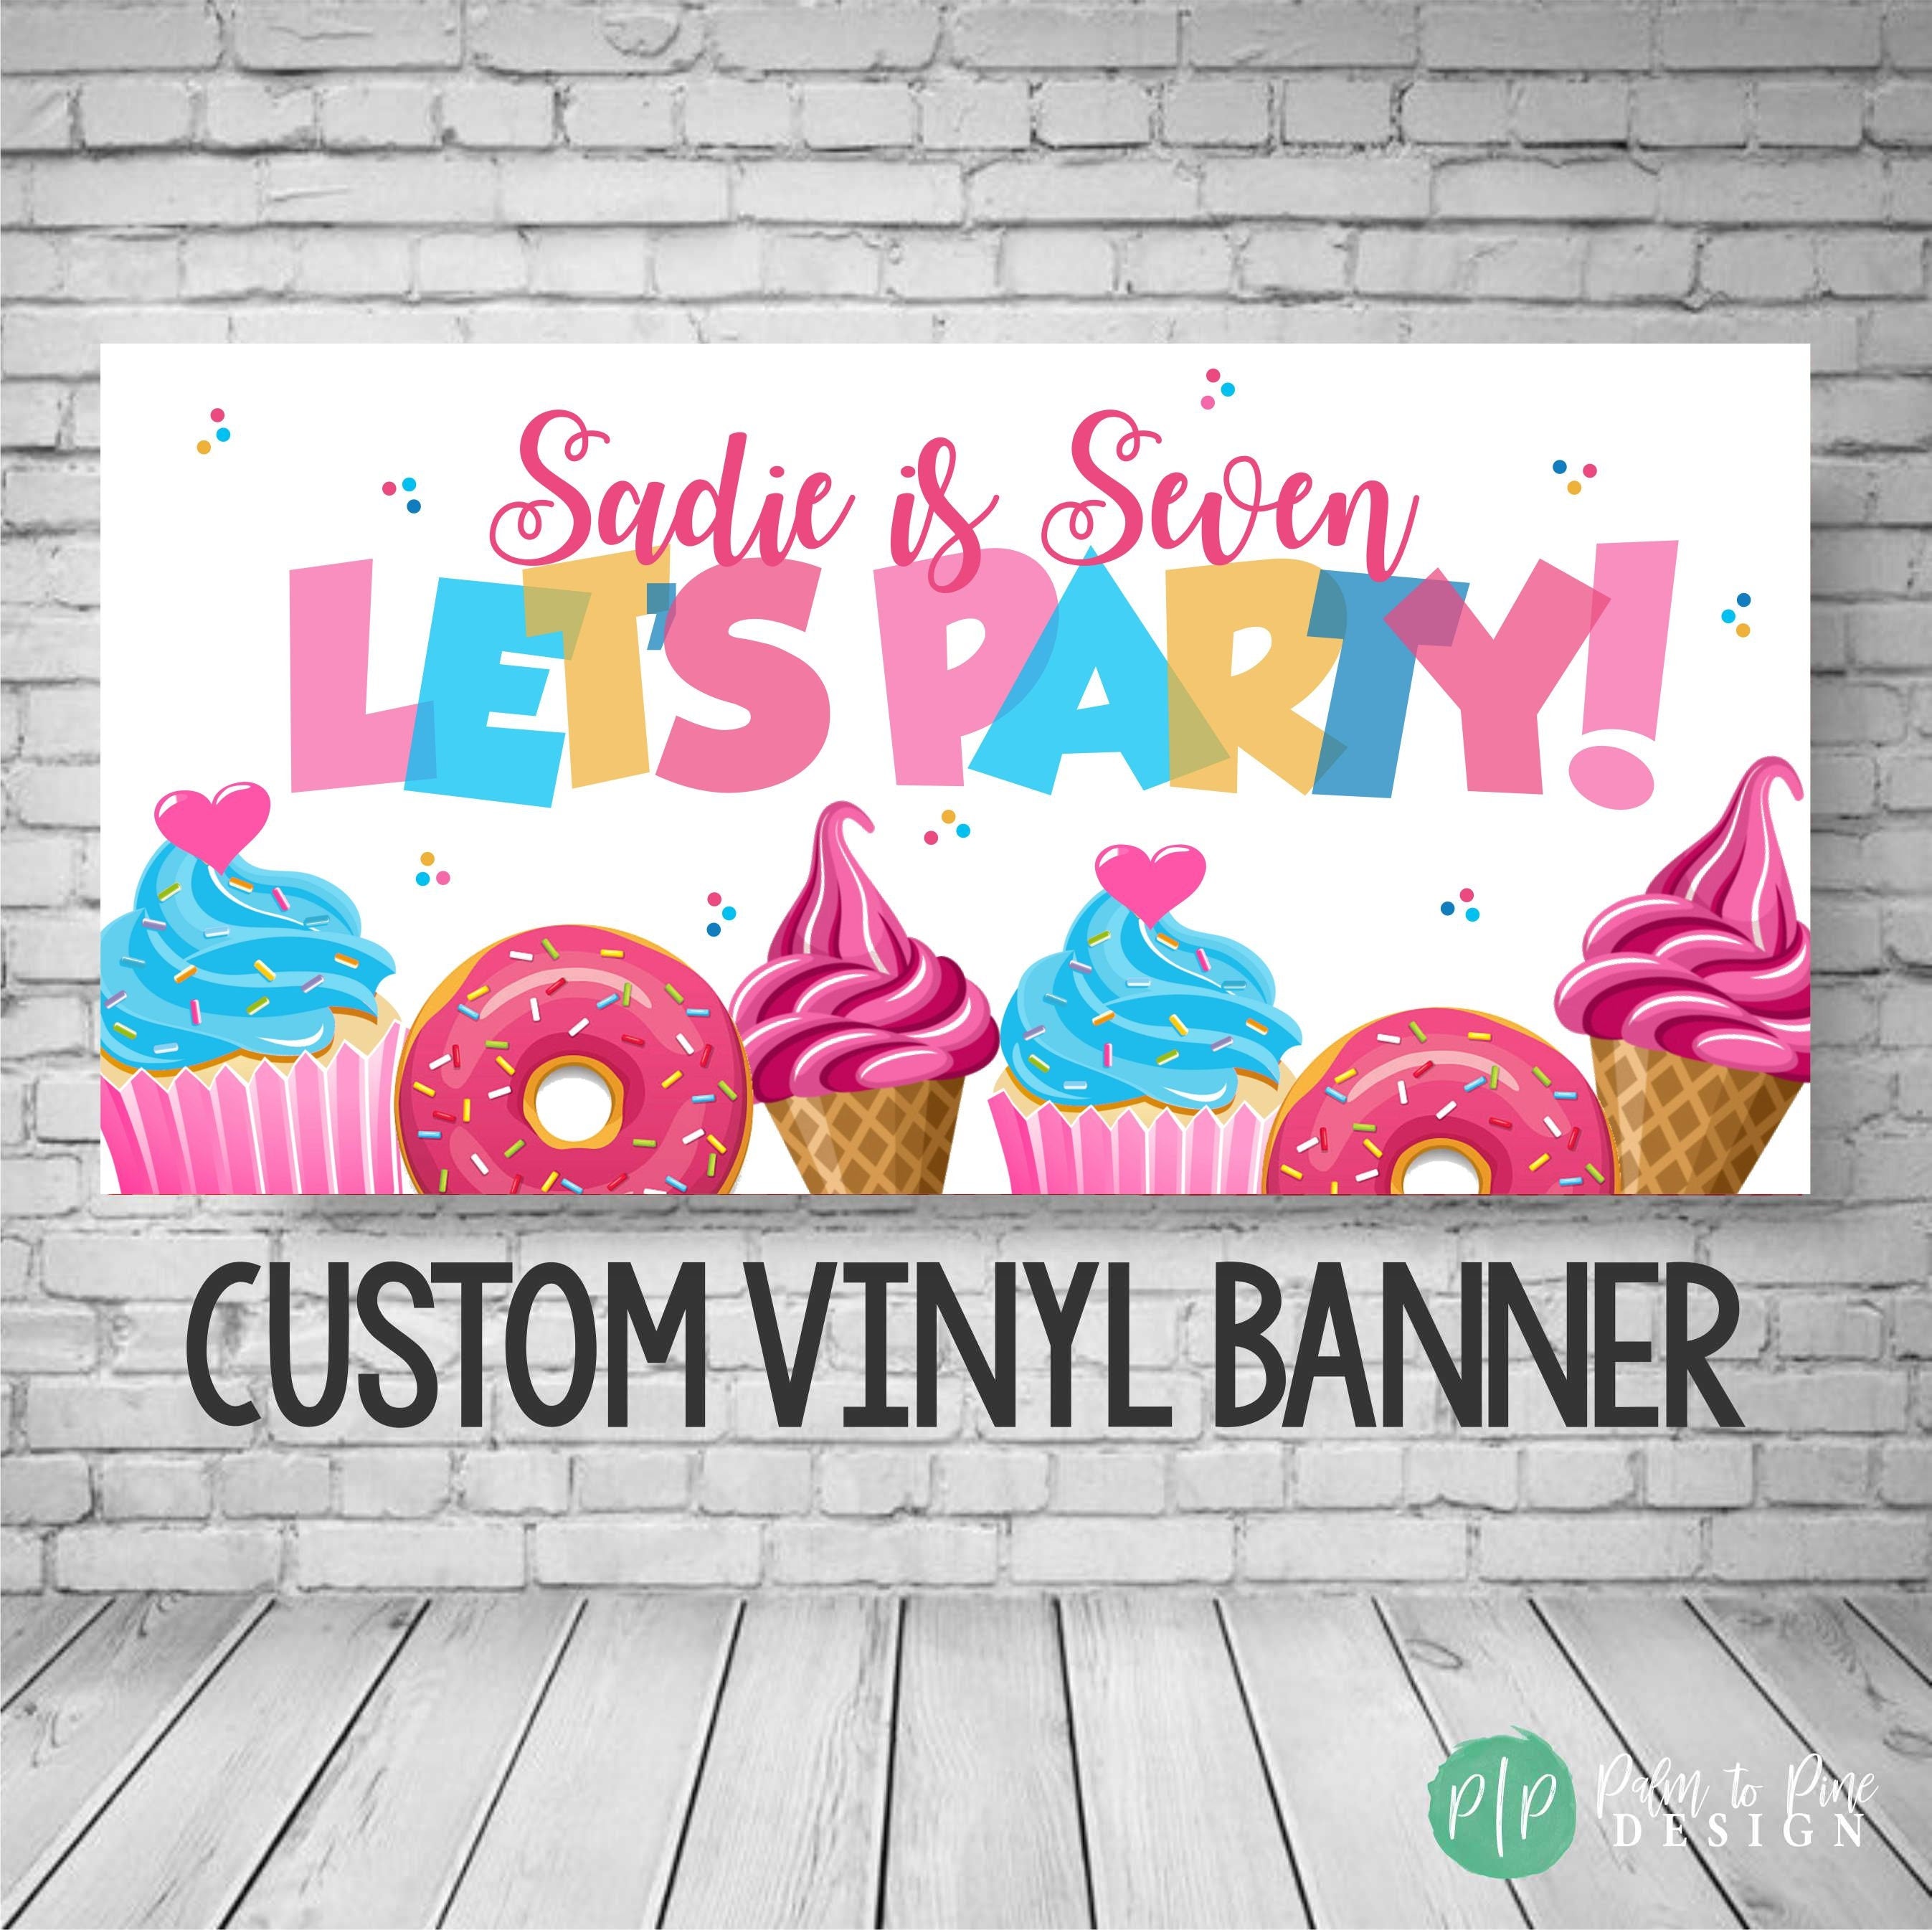 Lets Party Banner Cut Out Letters Stock Photo 1394883116